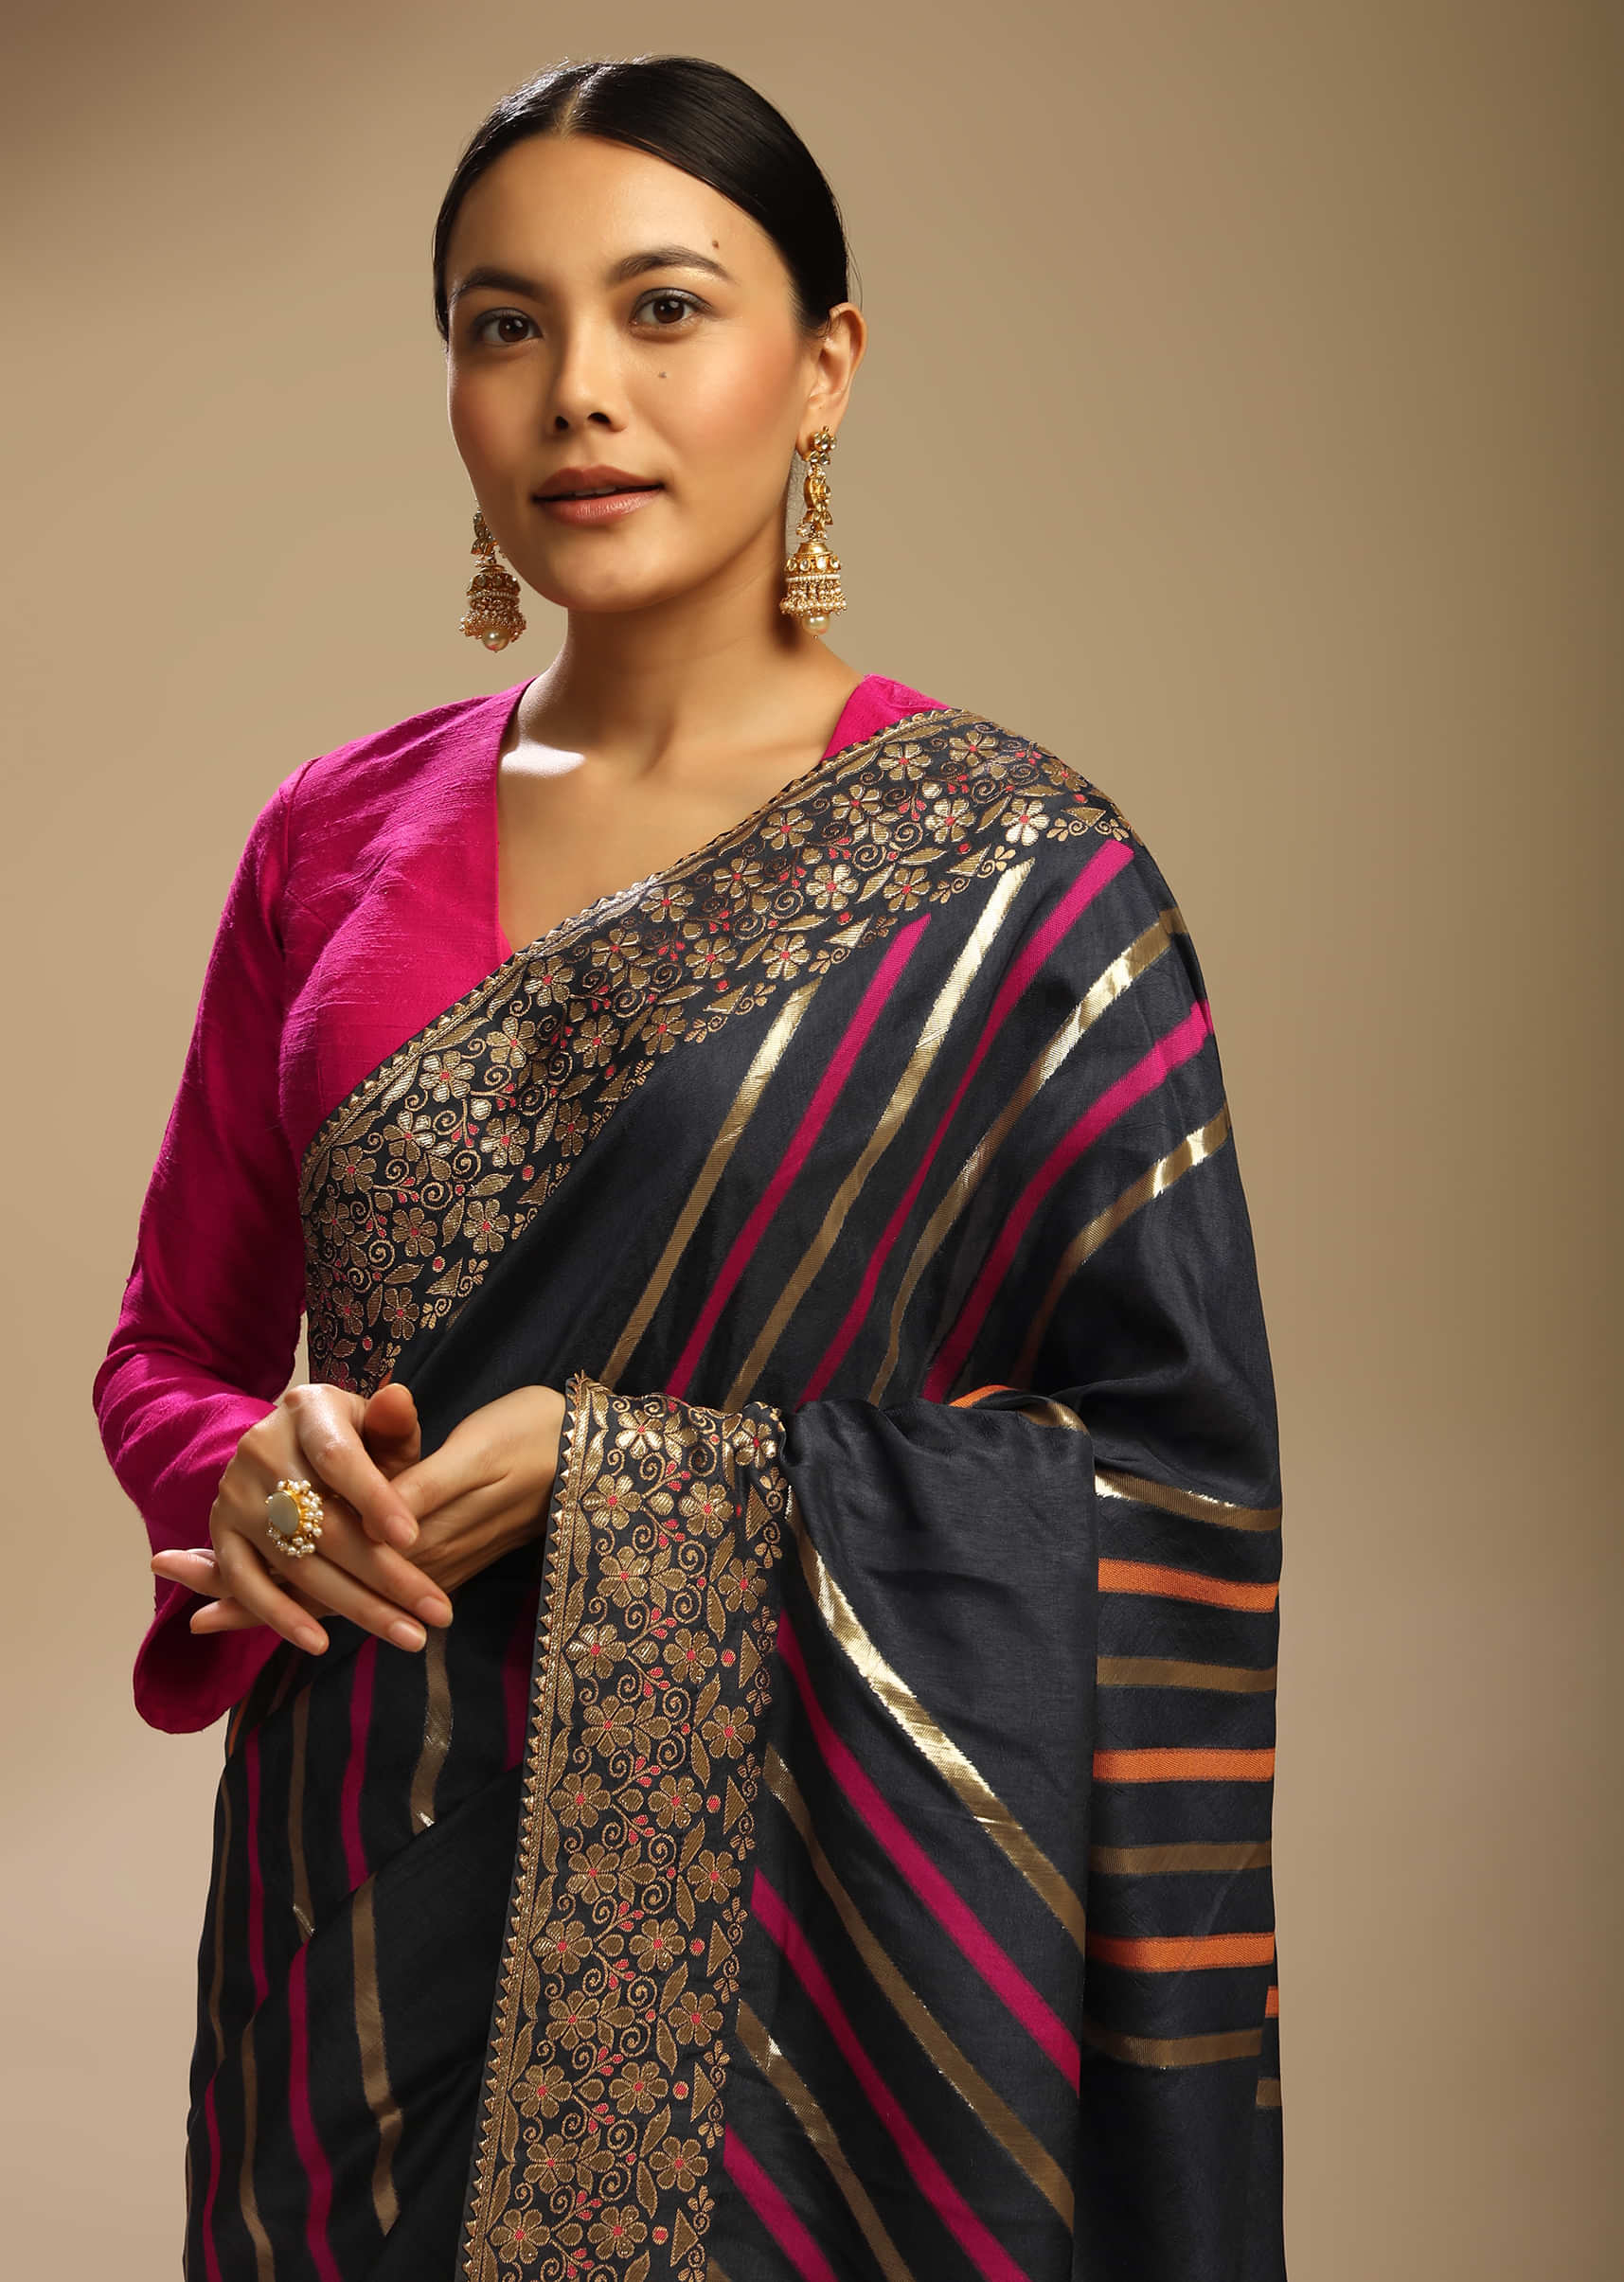 Eclipse Grey Saree In Dola Silk With Multi Colored Woven Diagonal Stripes And Floral Border